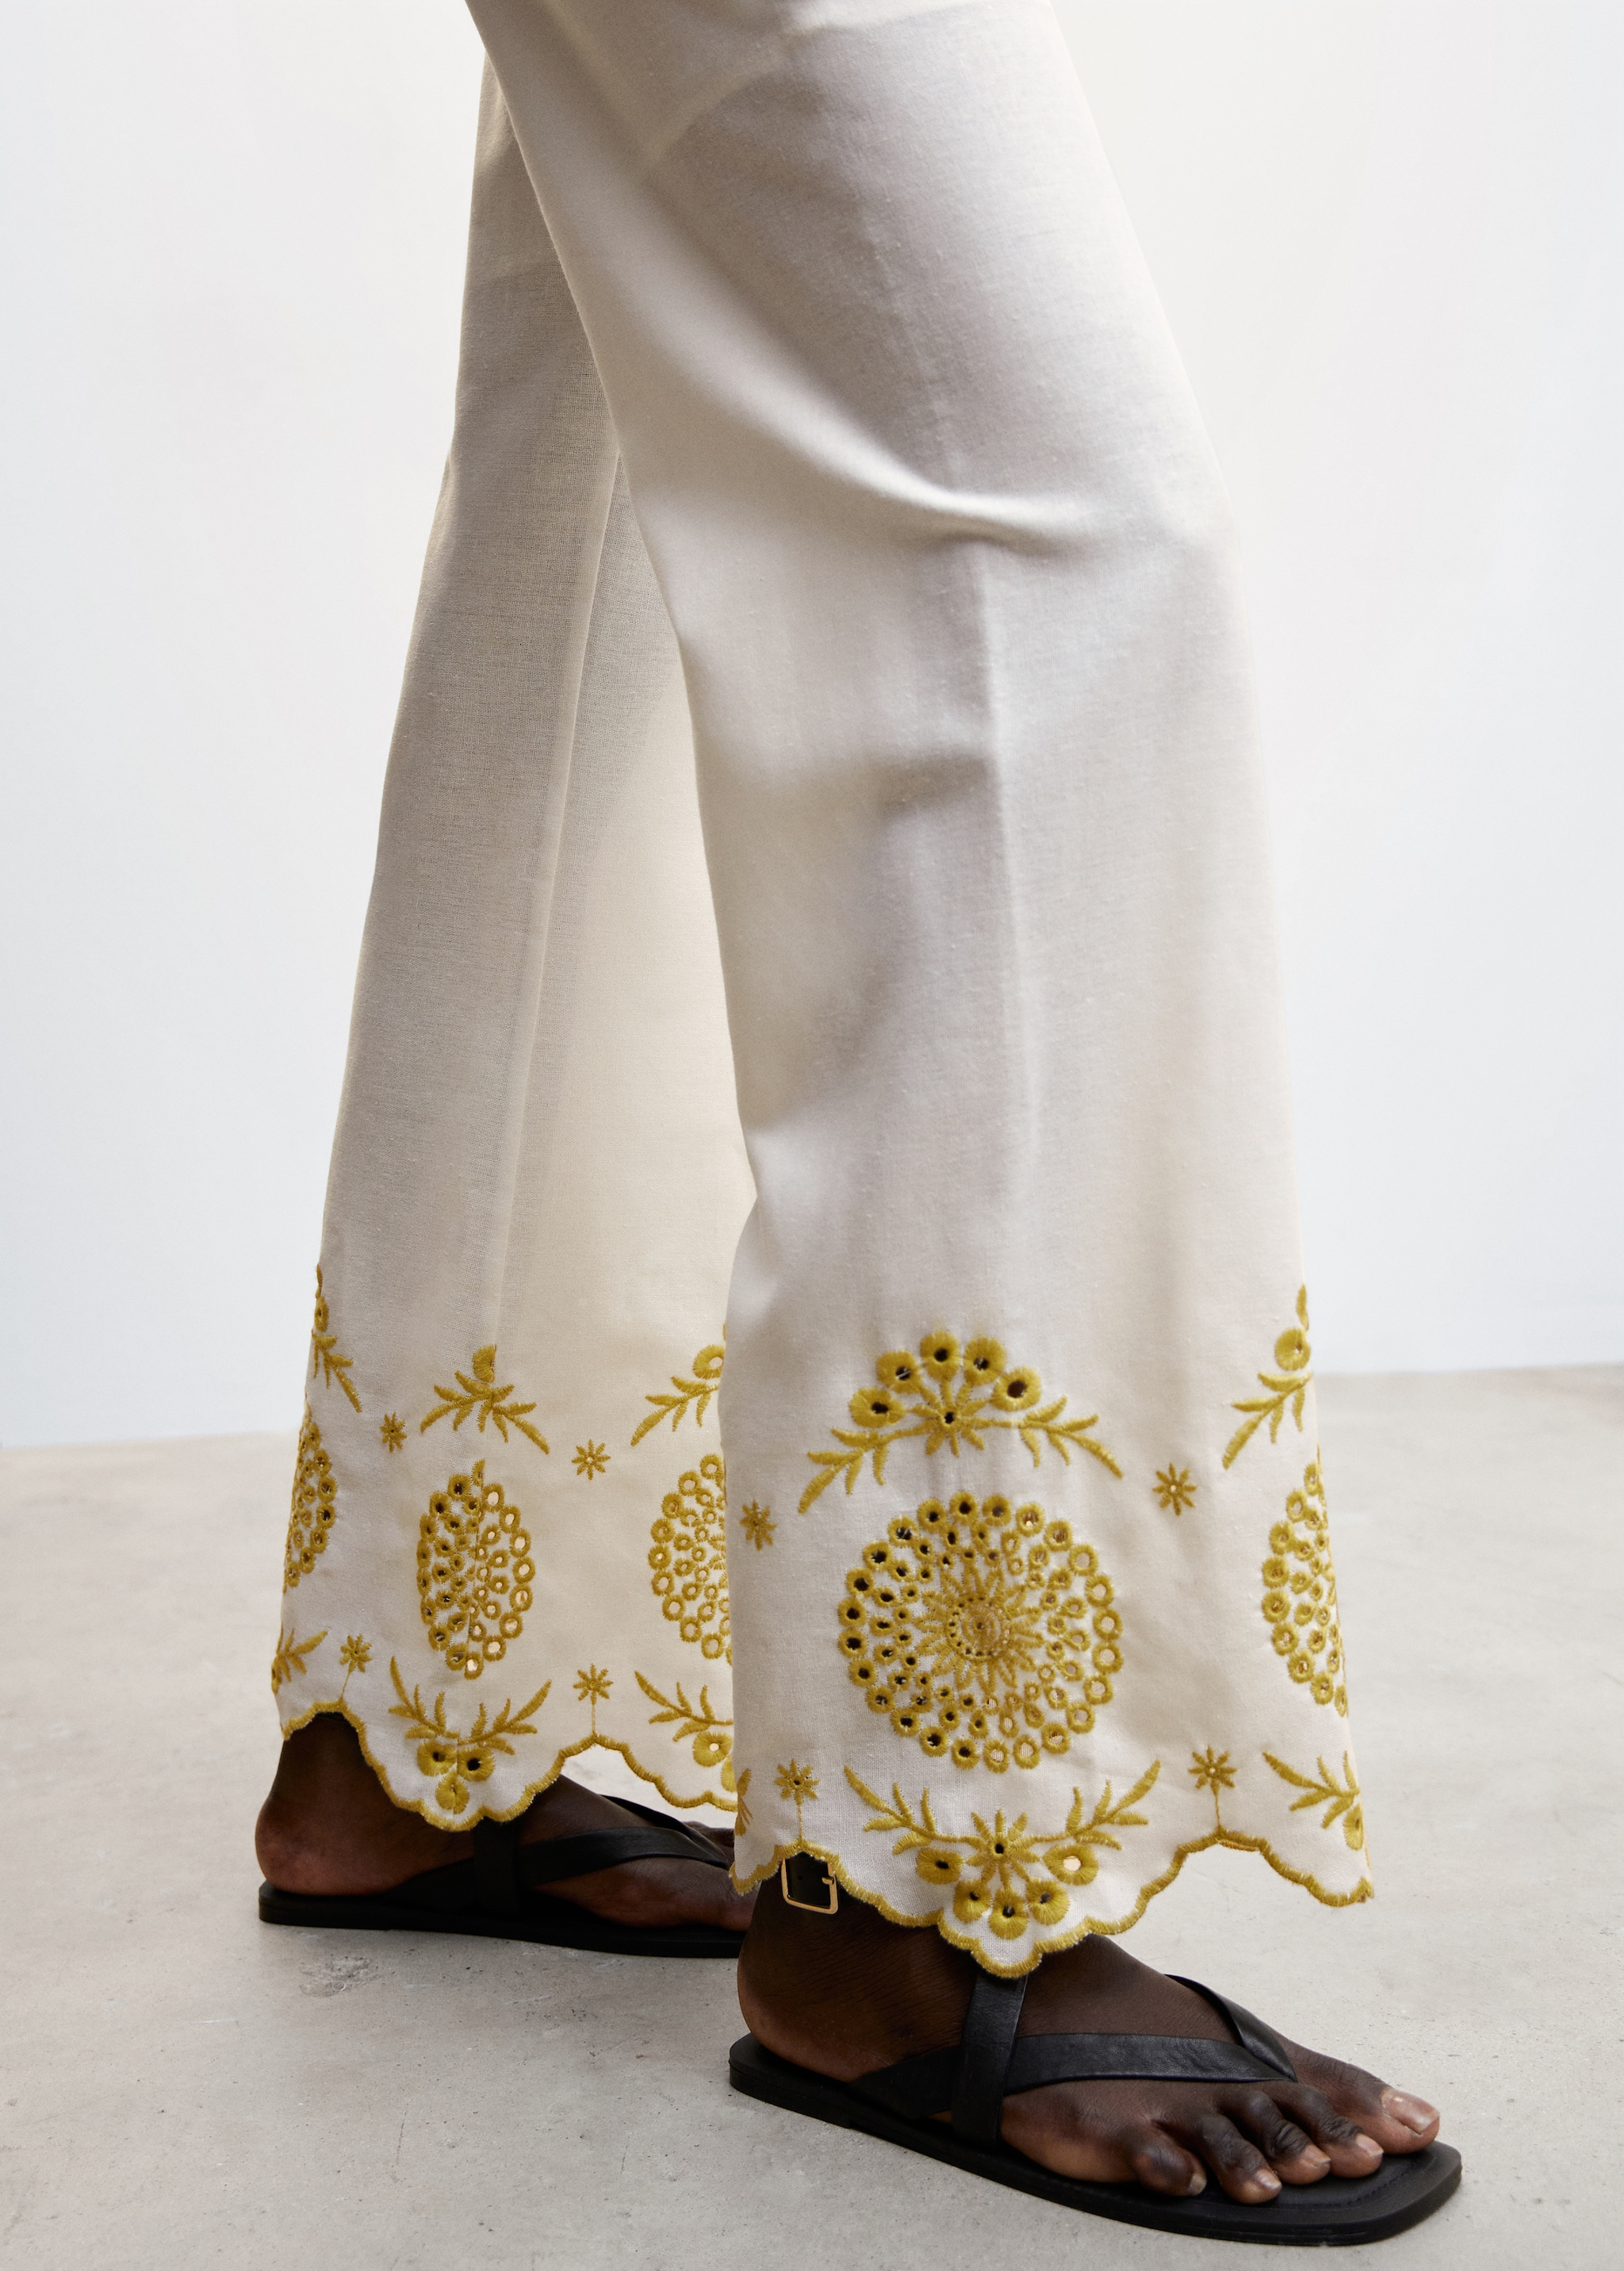 Swiss embroidered culotte trousers - Details of the article 1